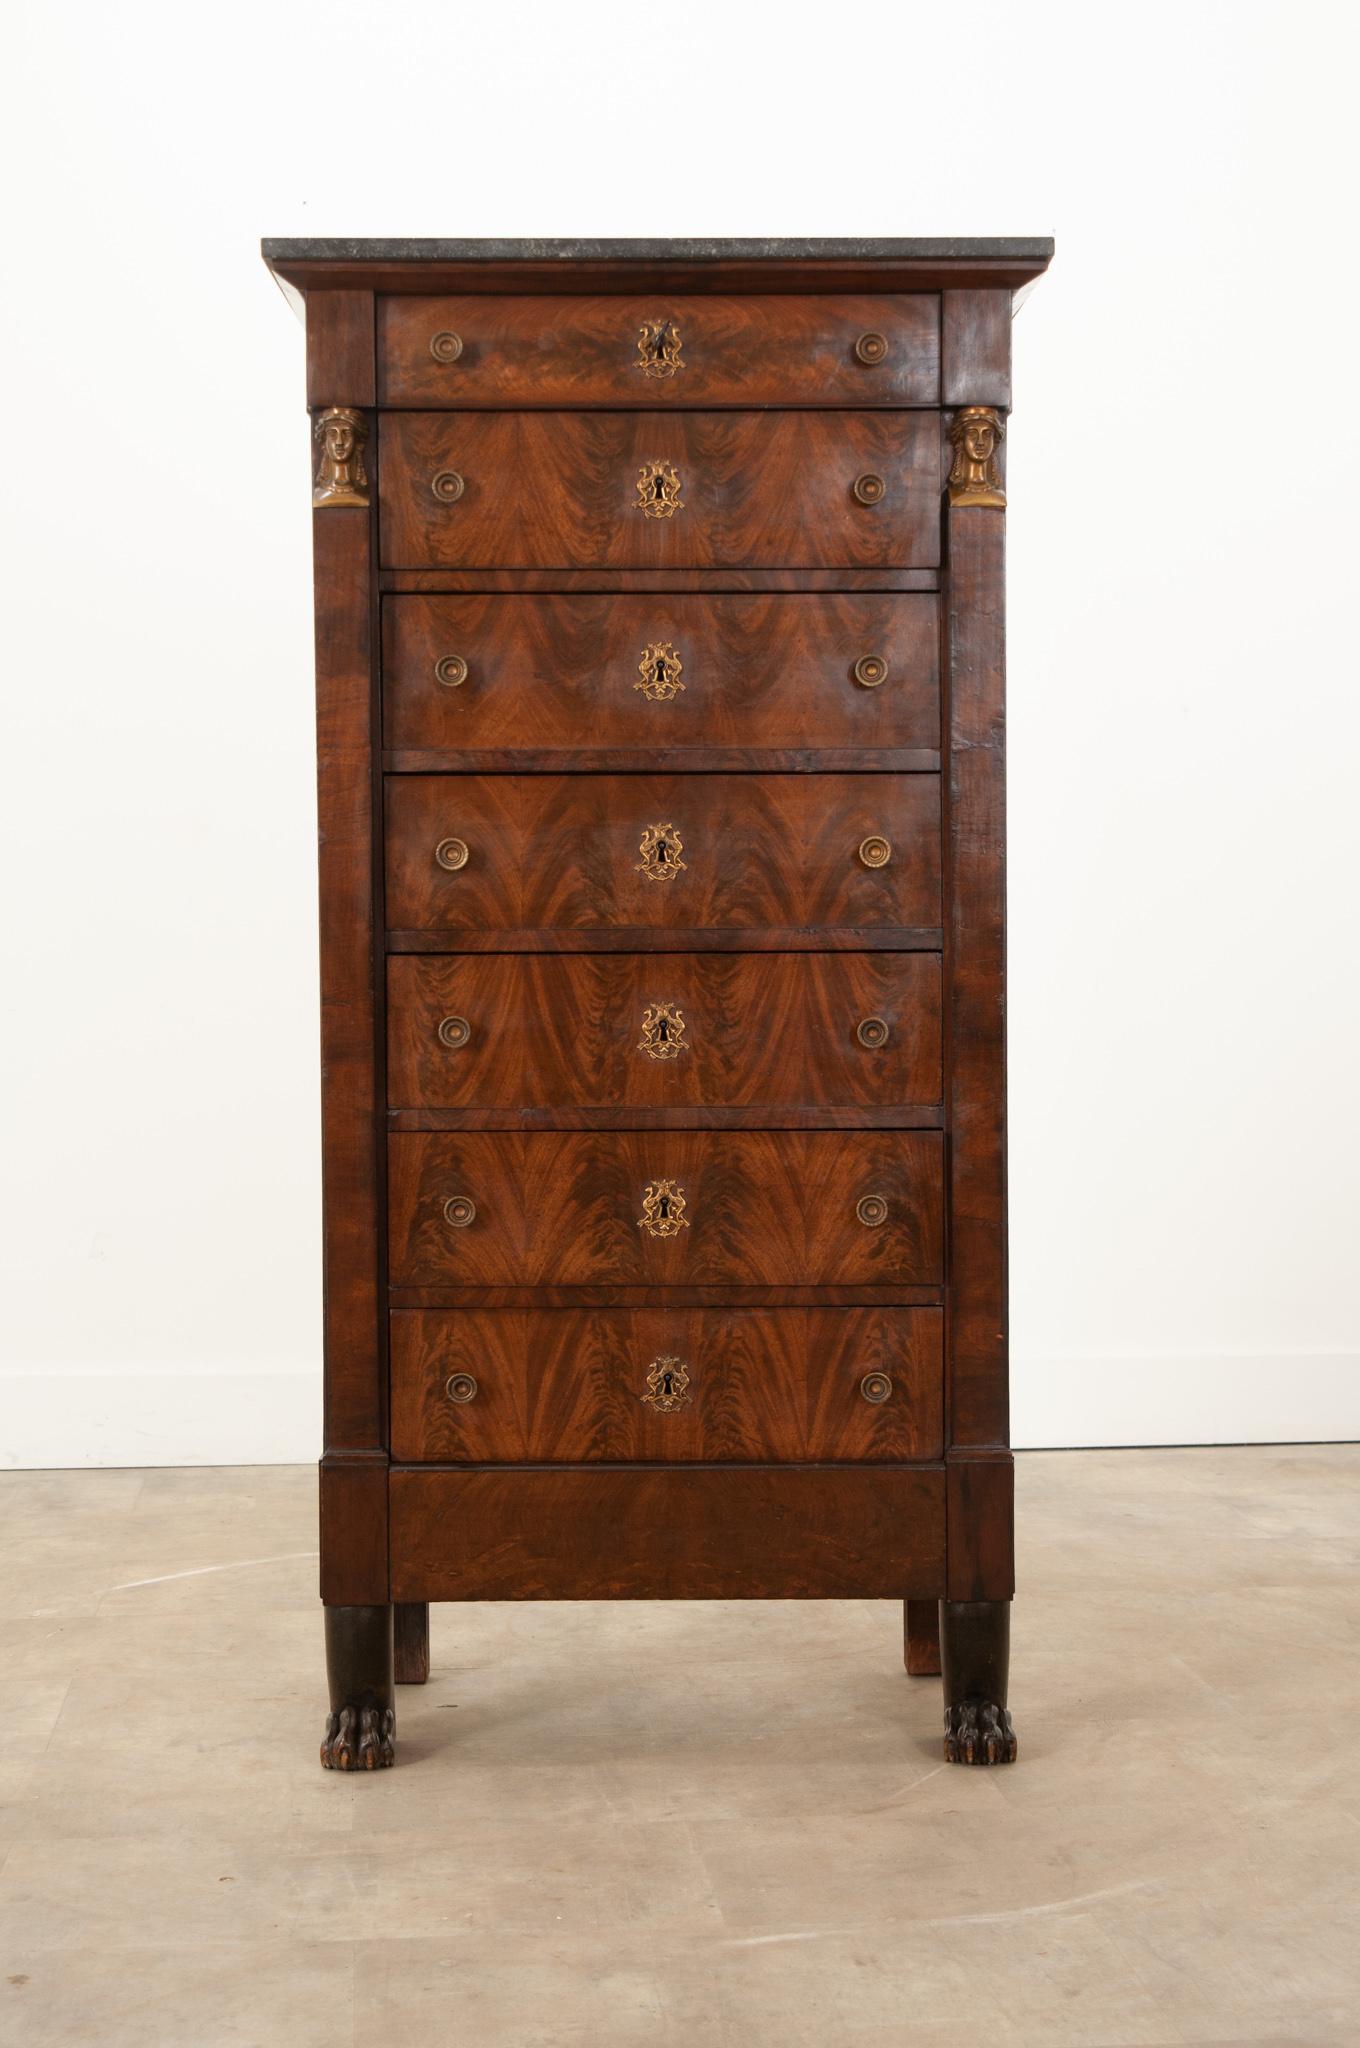 This magnificent 19th century French semainier is the perfect way to add more storage to your space without sacrificing style or square footage. Semainiers were originally created in the 18th Century with 7 drawers to hold a week’s supply of